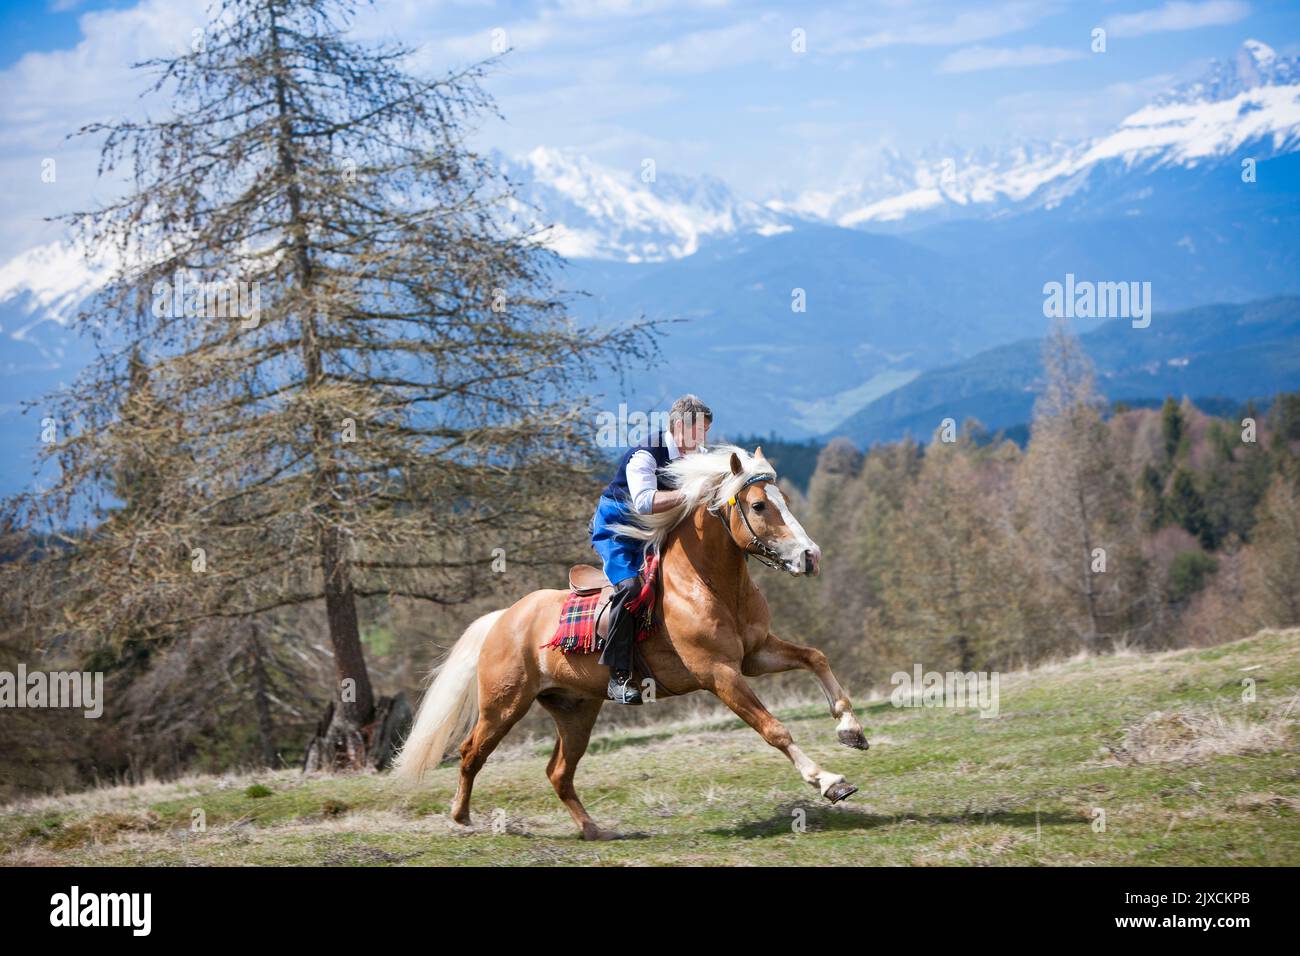 Haflinger Horse. Rider on stallion galloping on a mountain pasture. Germany Stock Photo